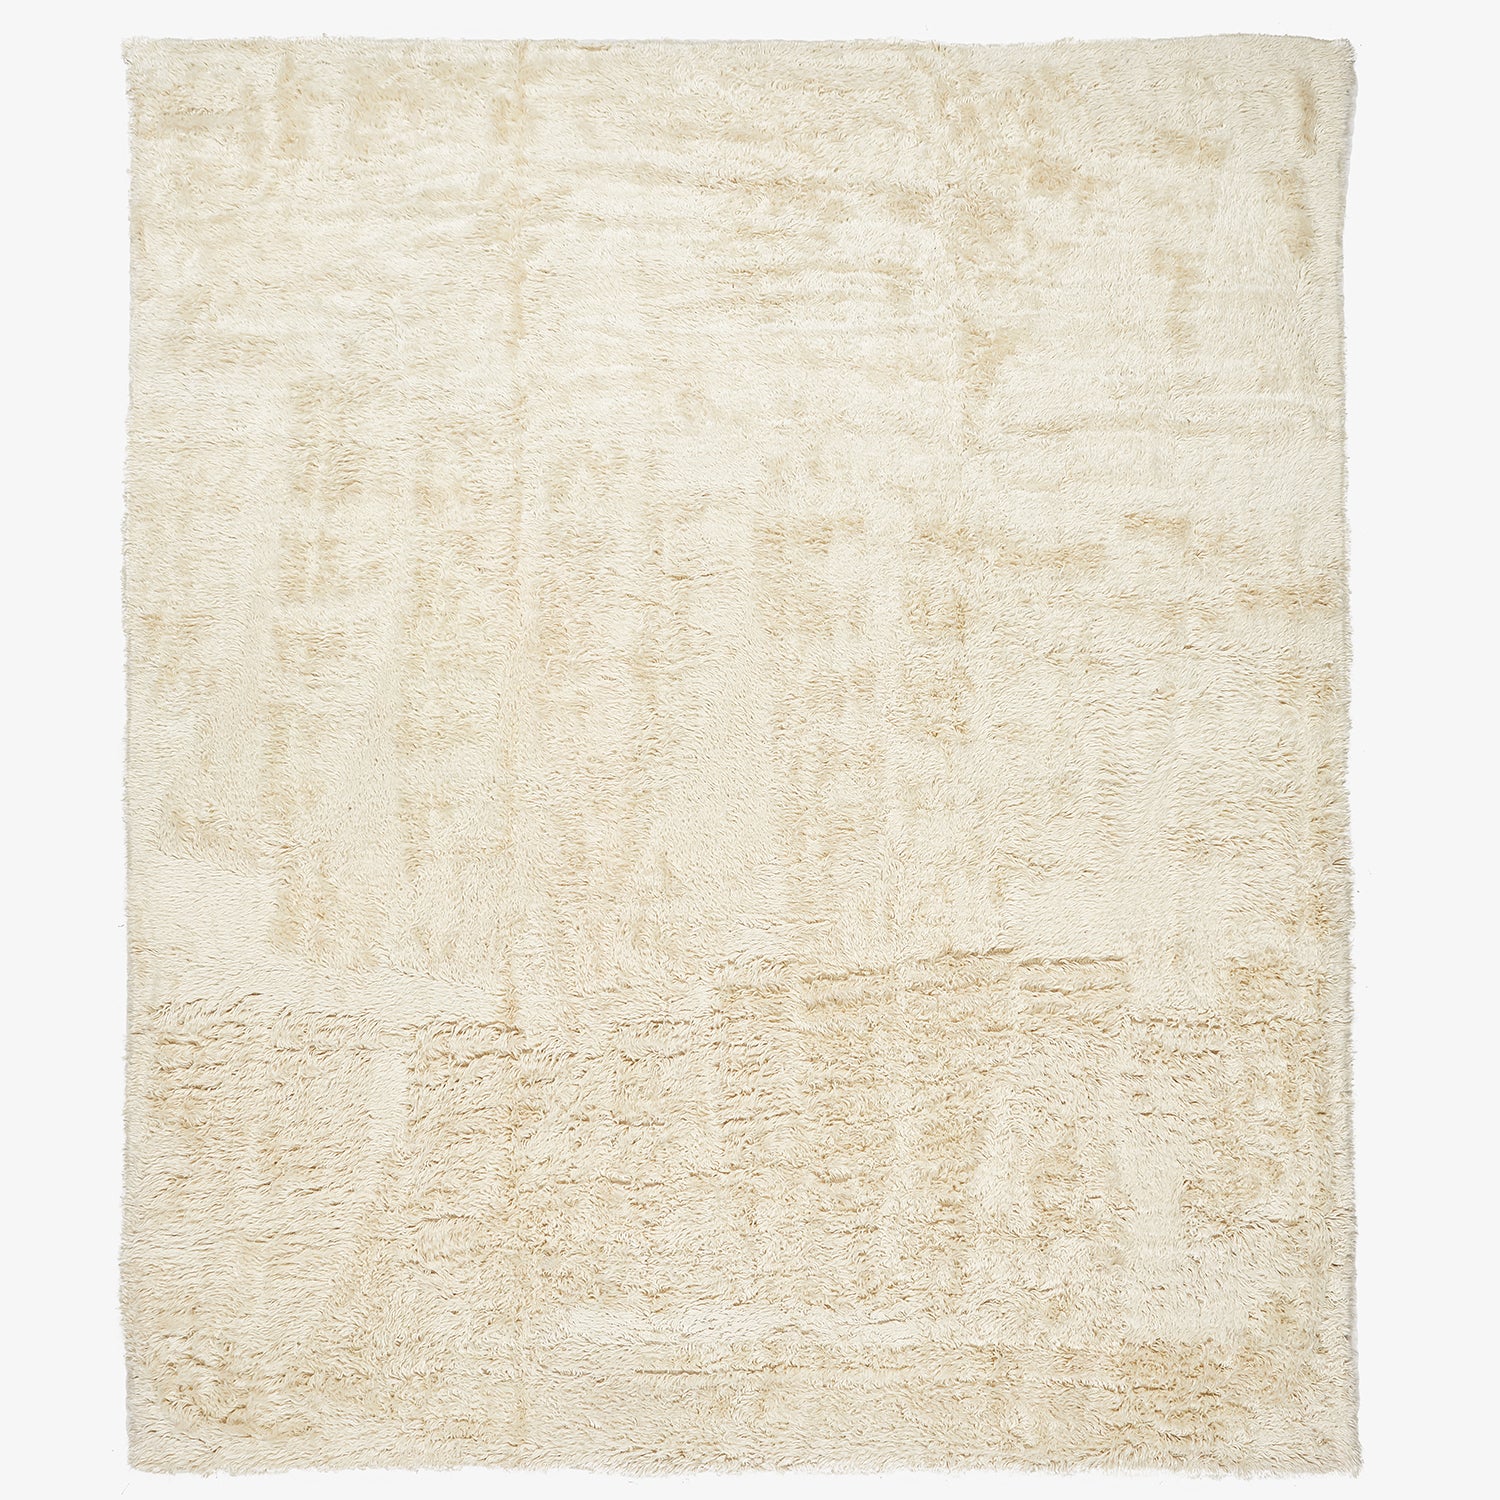 Rectangular cream rug with plush texture and subtle wear marks.